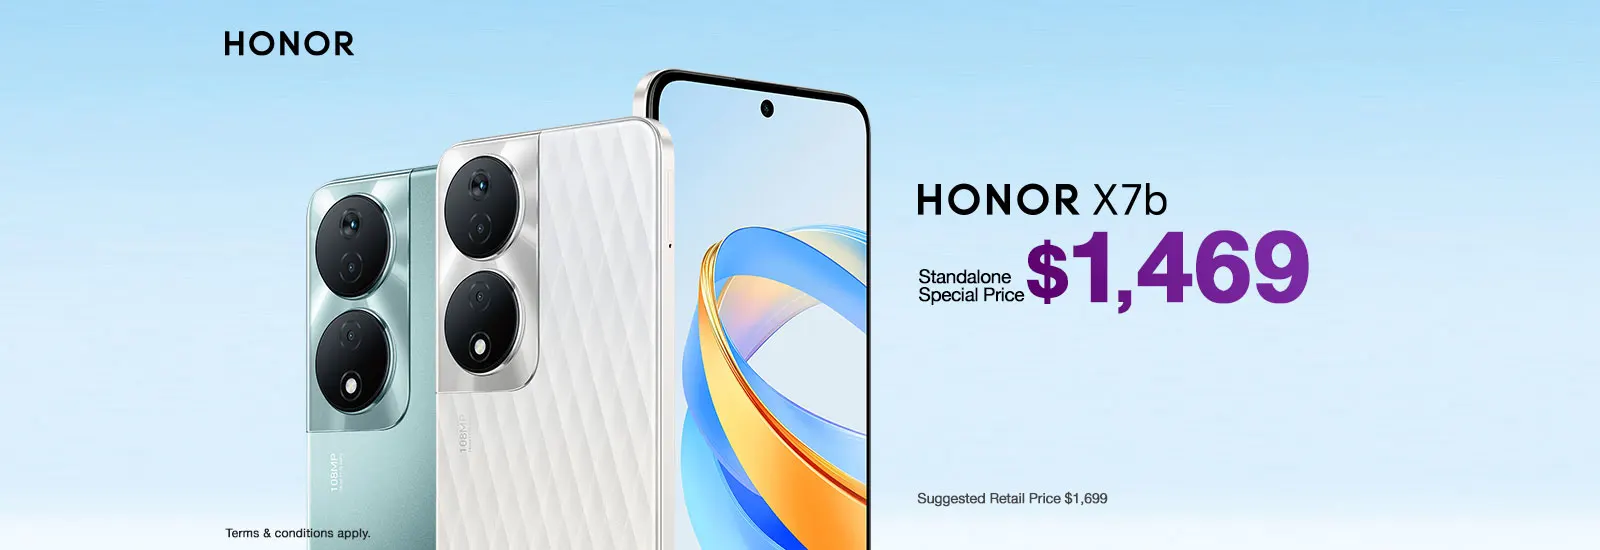 HONOR X7b 5G Specifications